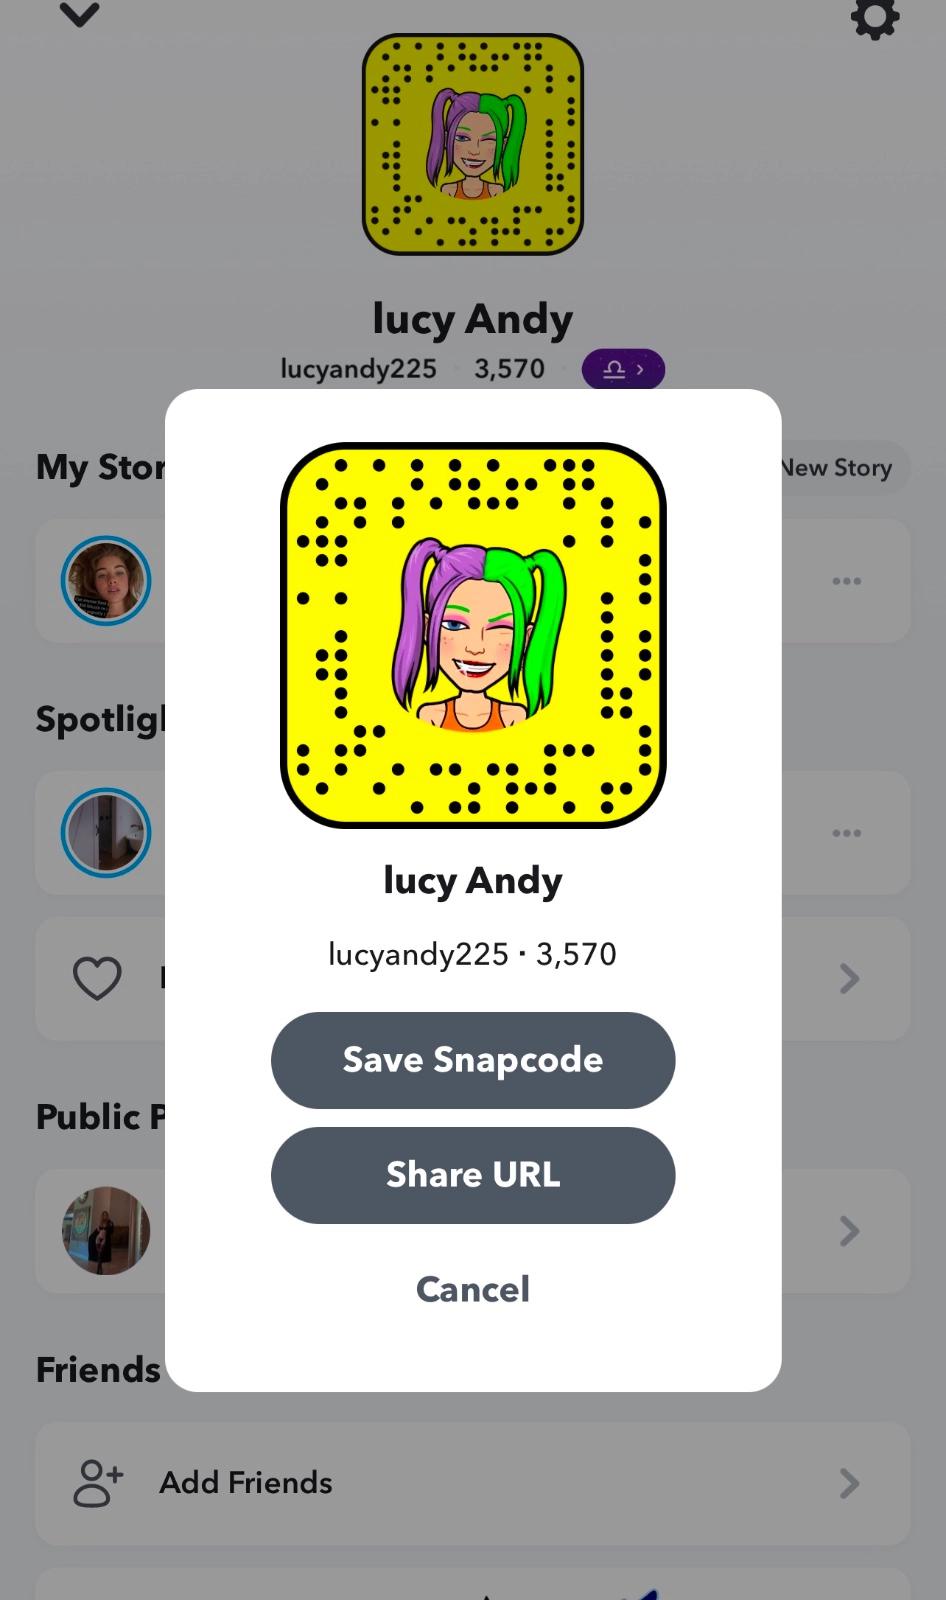 Let fuck Add me on Snapchat lucyandy225 To hookup I’m available 24/7🍑🍑